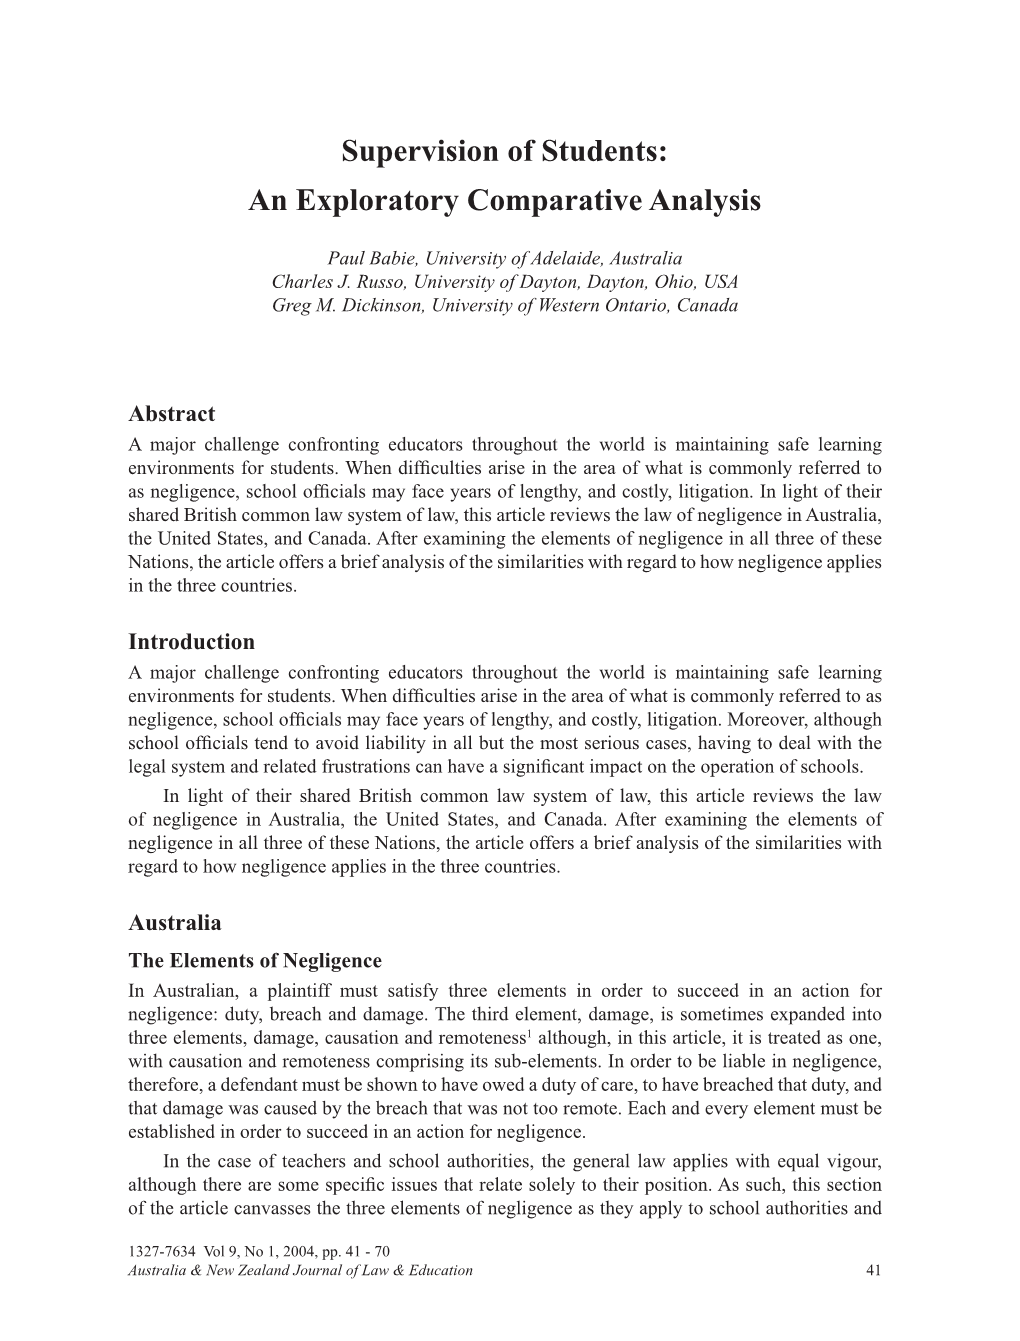 Supervision of Students: an Exploratory Comparative Analysis Paul Babie, Charles J. Russo, Greg M. Dickinson